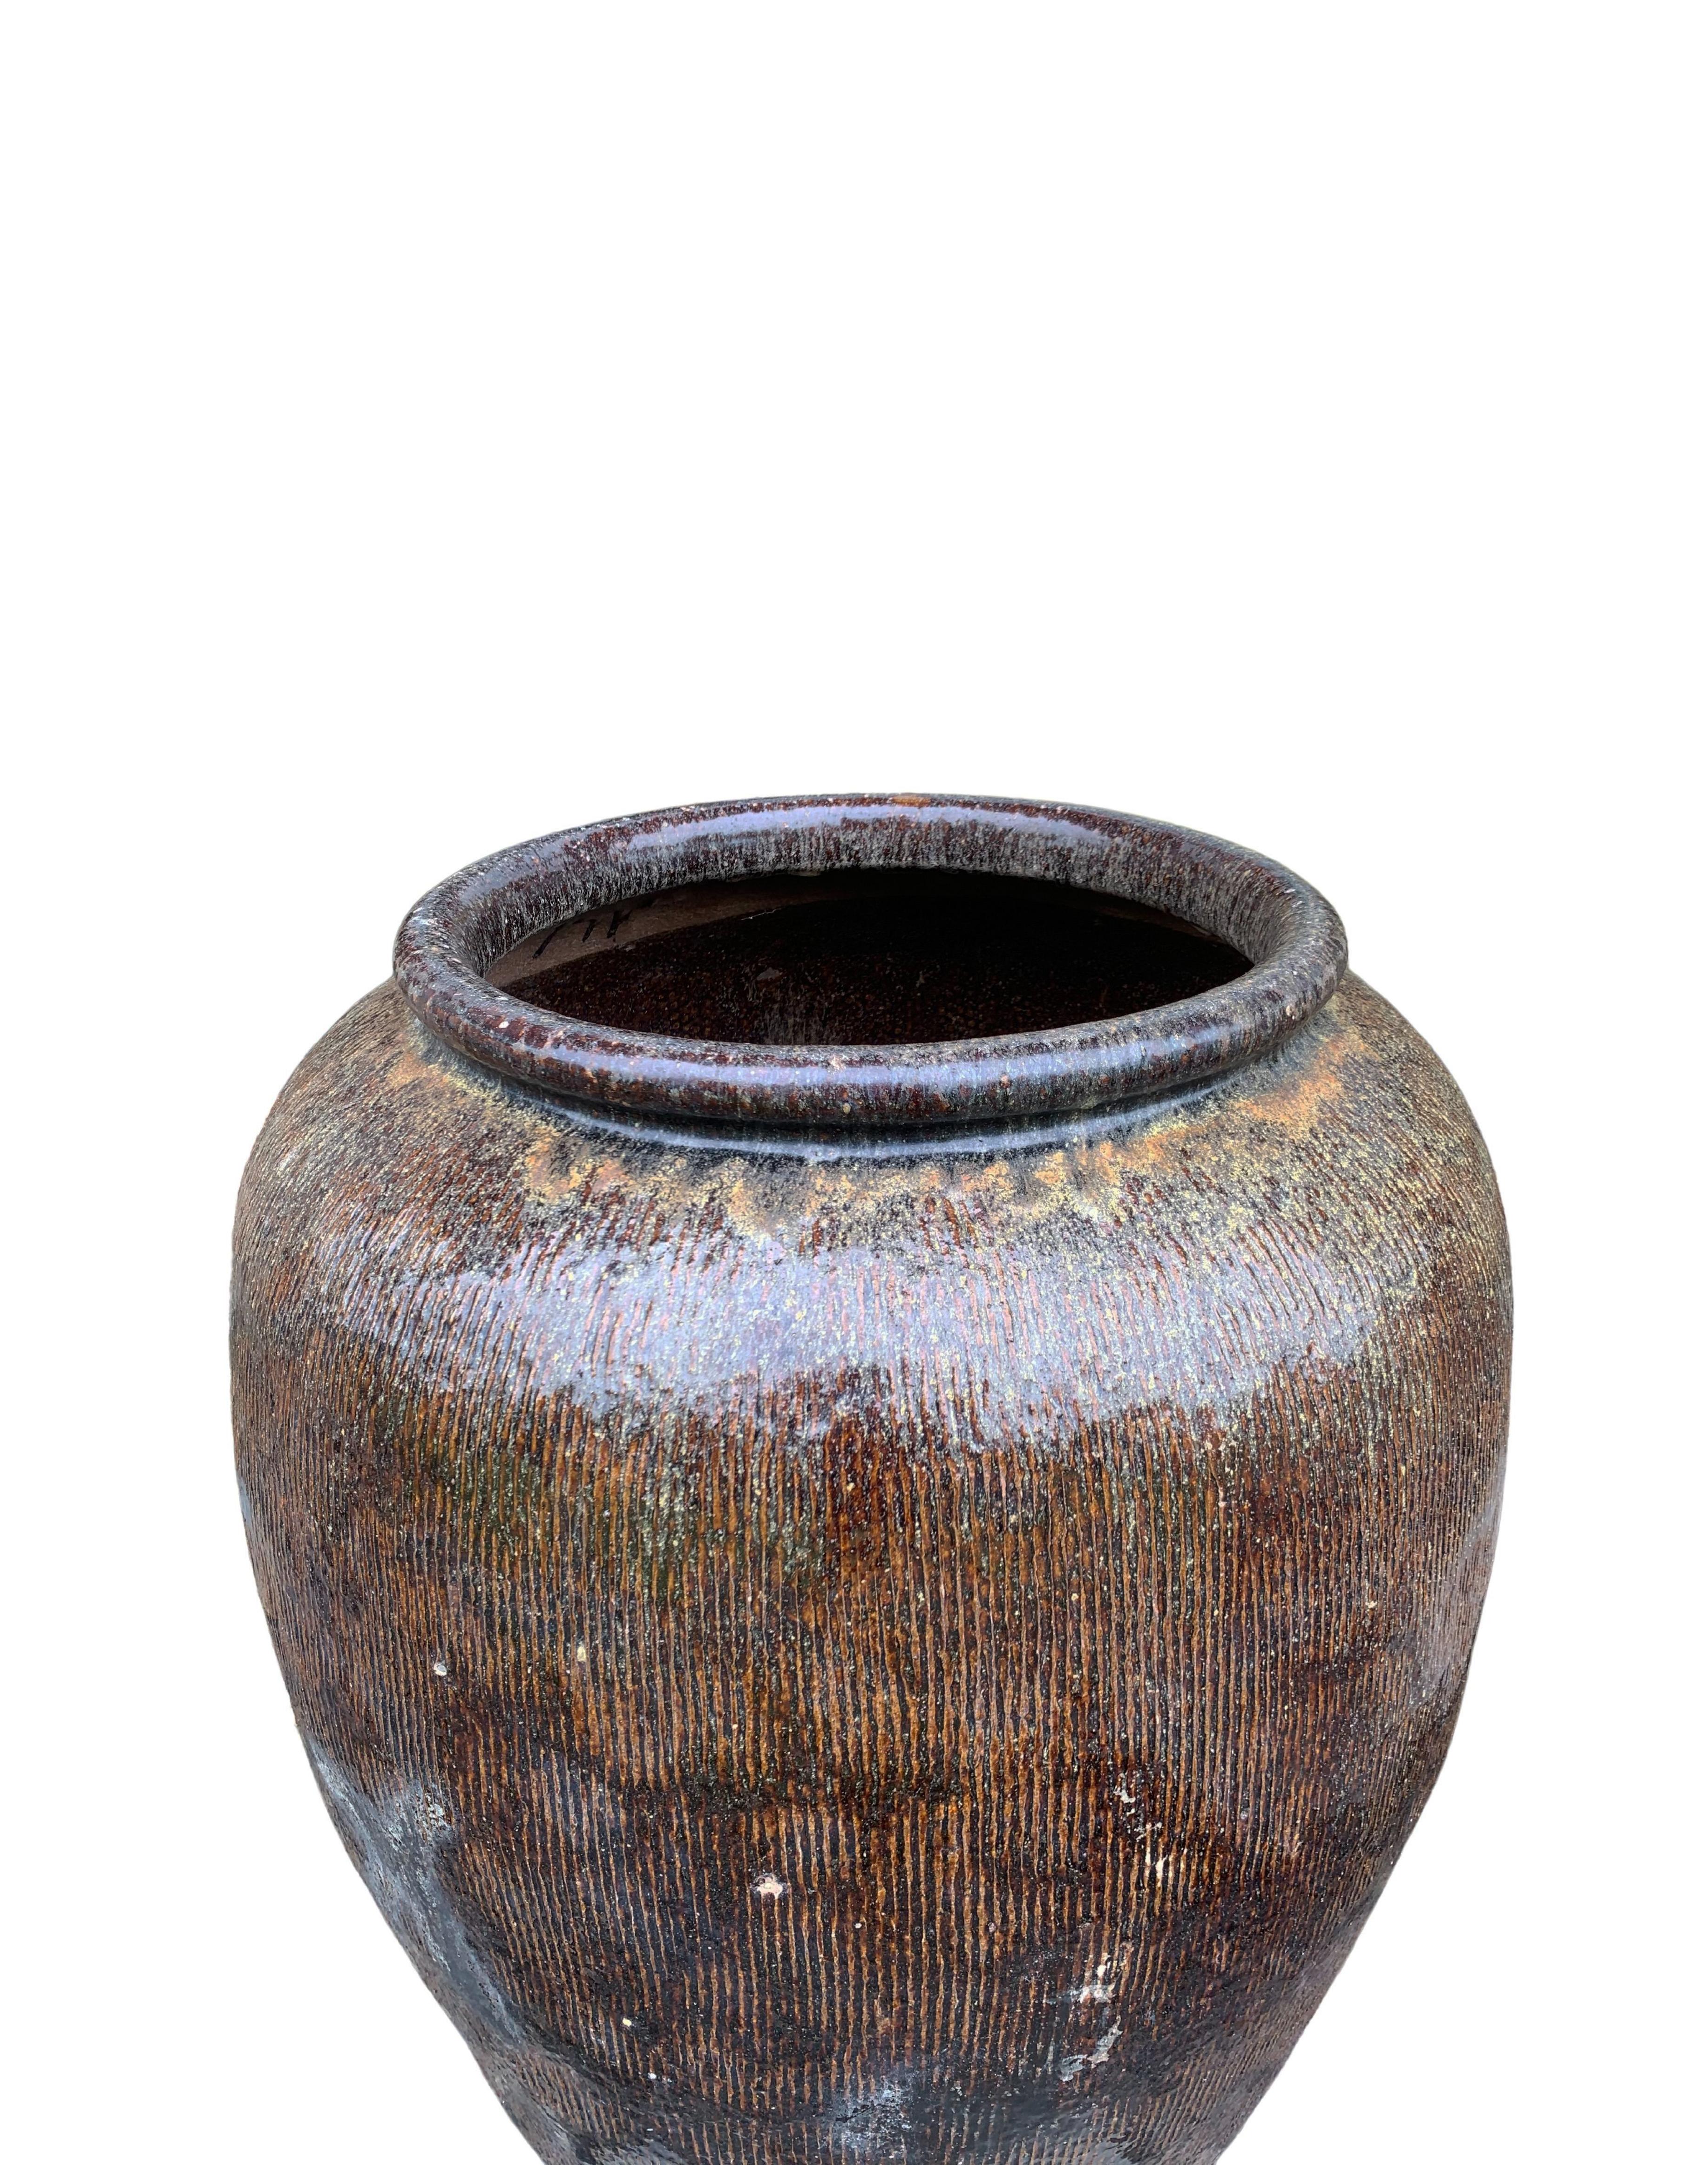 Qing Antique Chinese Glazed Ceramic Soy Sauce Jar, c. 1900 For Sale